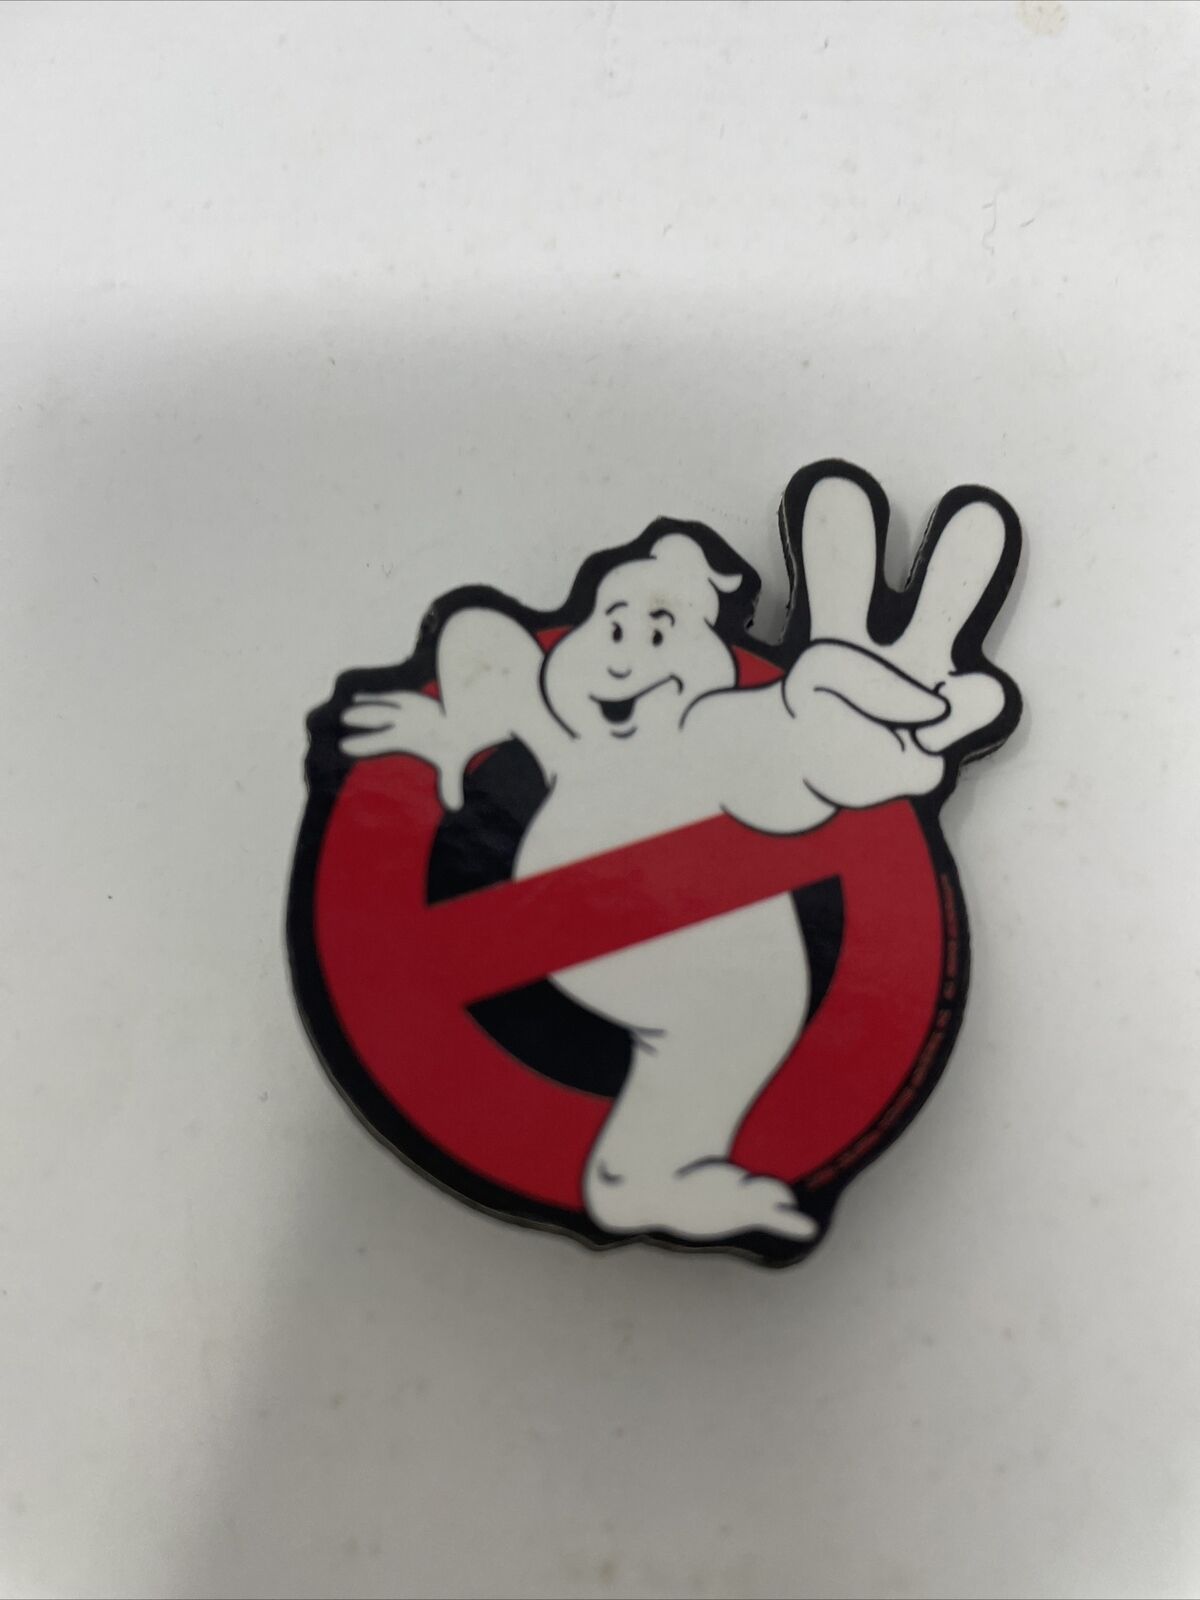 Ghostbusters 2 Vintage Button Pin Pinback Badge 2 Inch